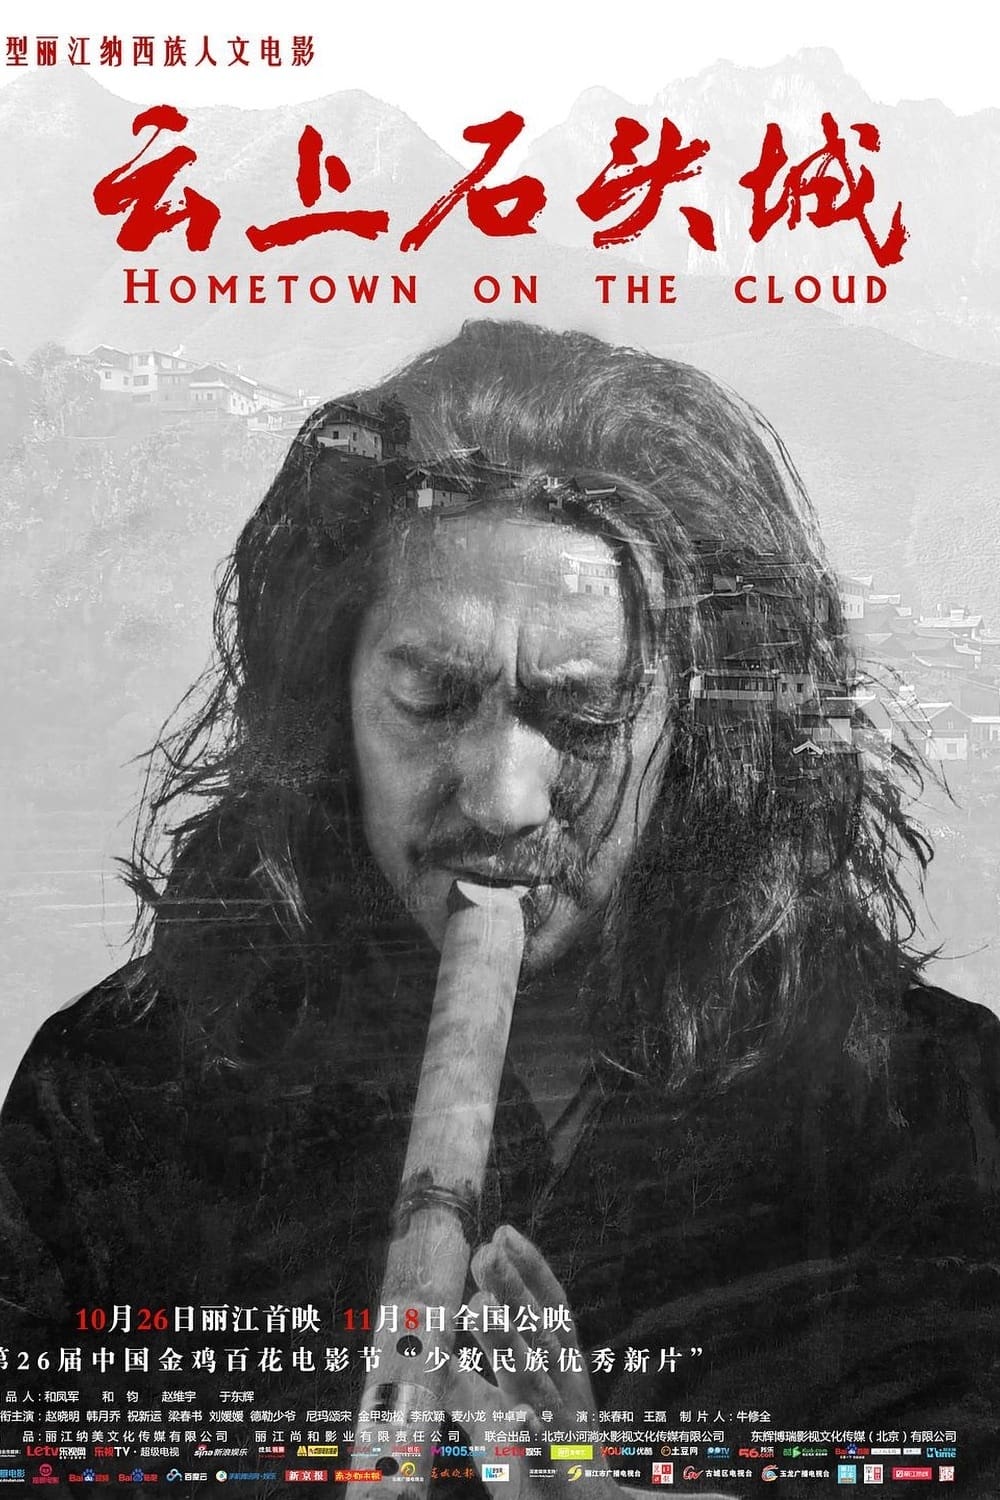 Hometown on the cloud